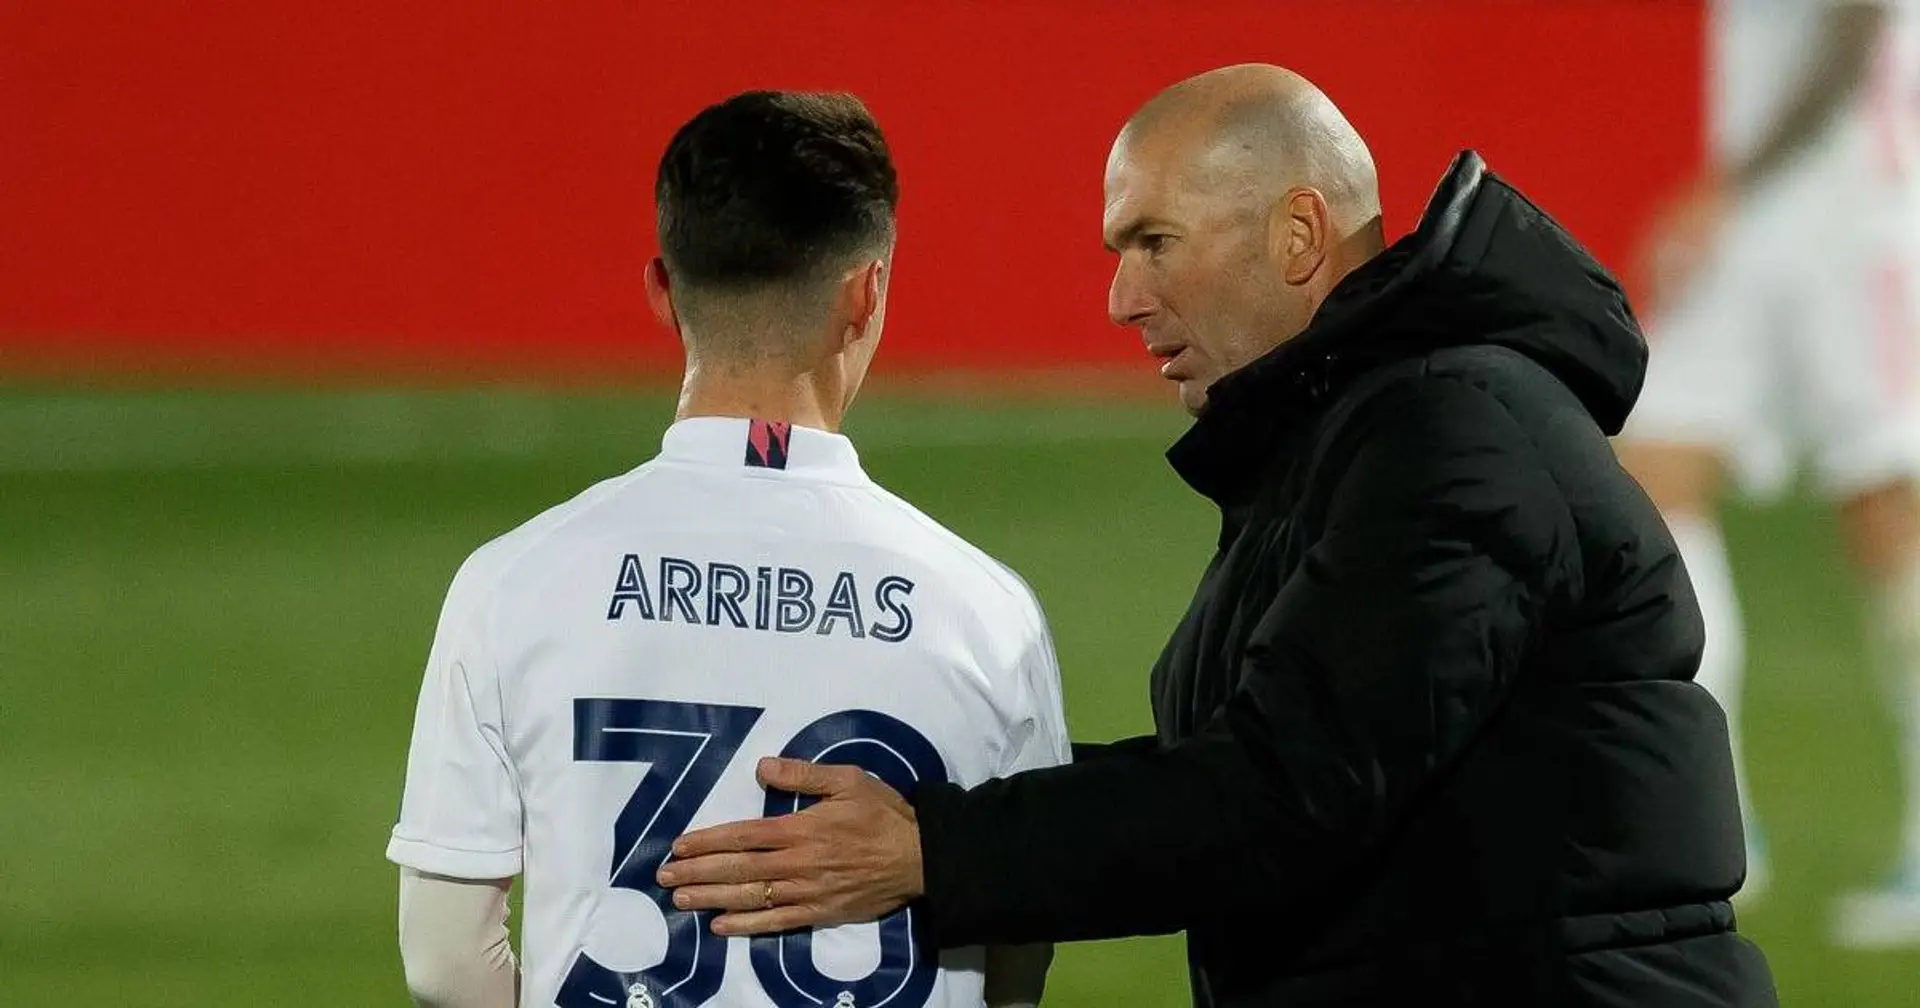 'Zidane has a depleted bench and limited transfer budget': fan explores which Castilla stars can step up next season